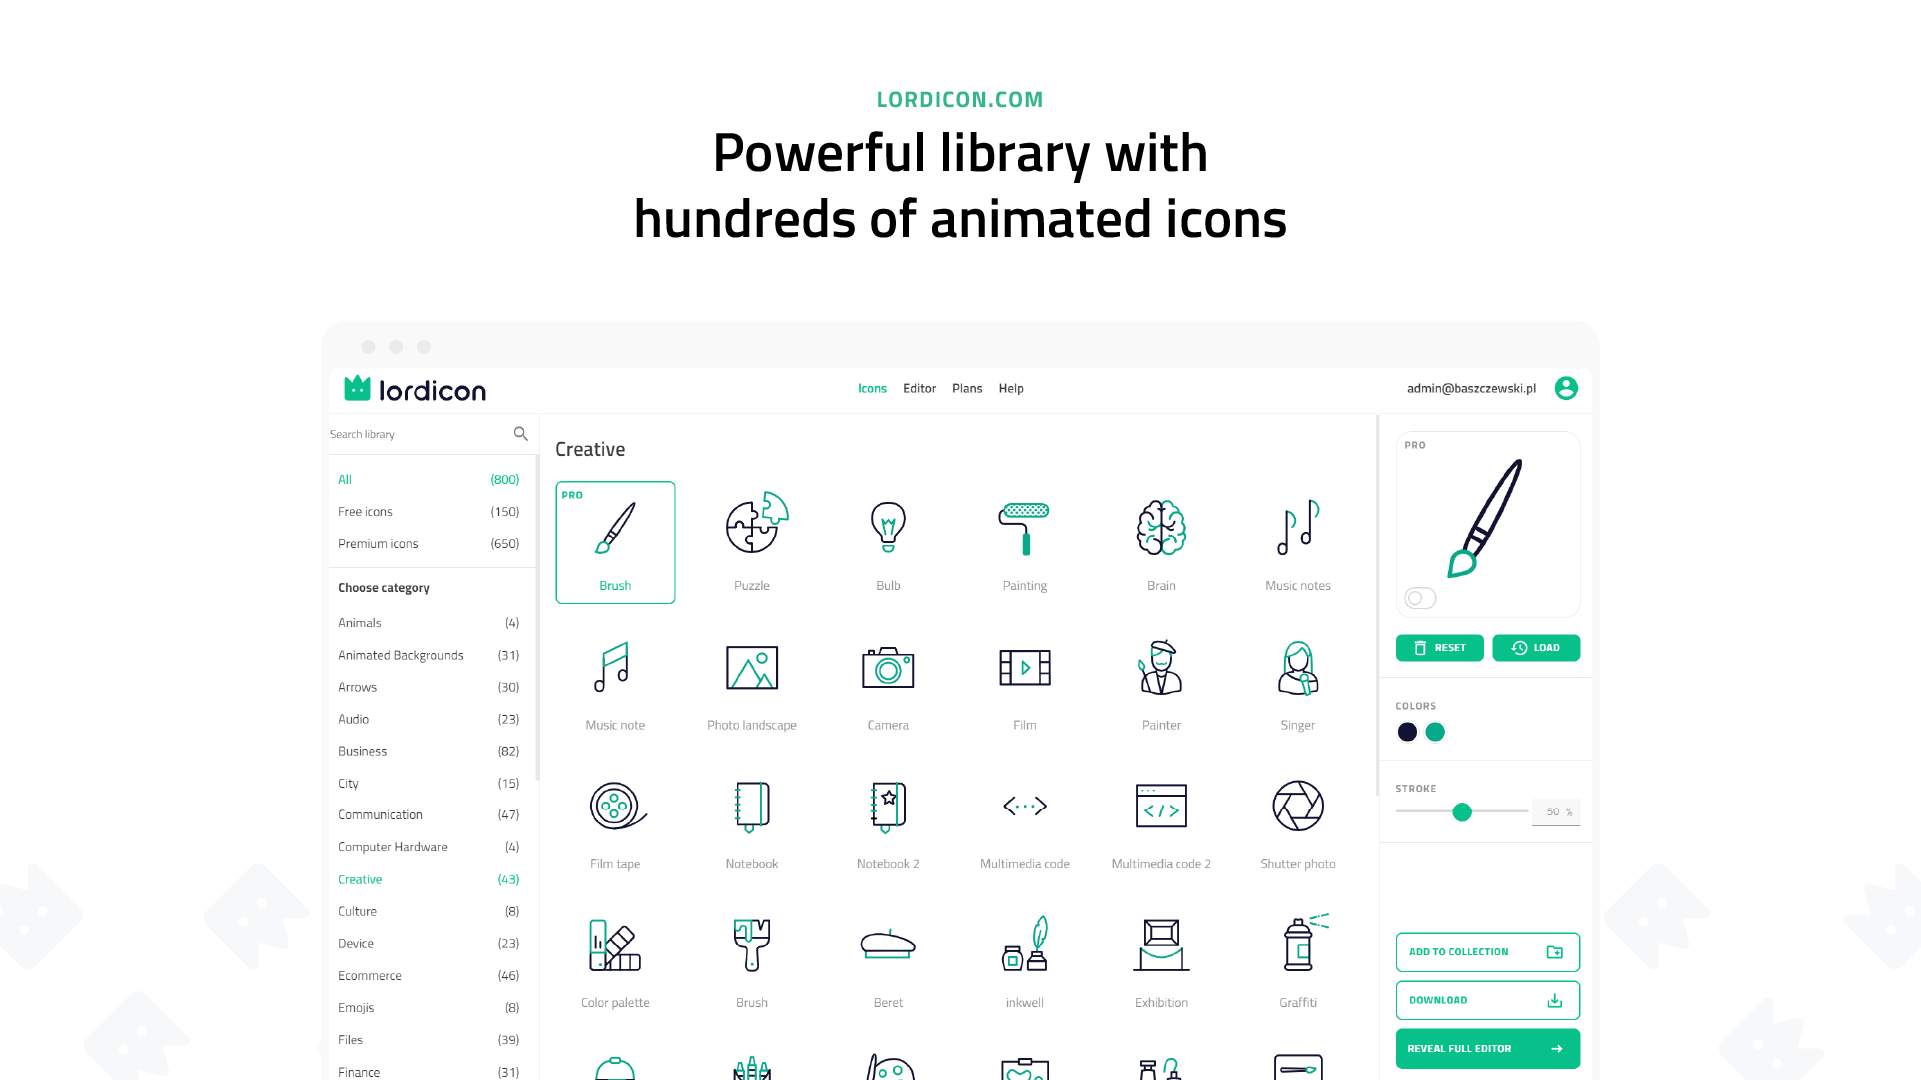 17,000+ Animated Icons - Lordicon